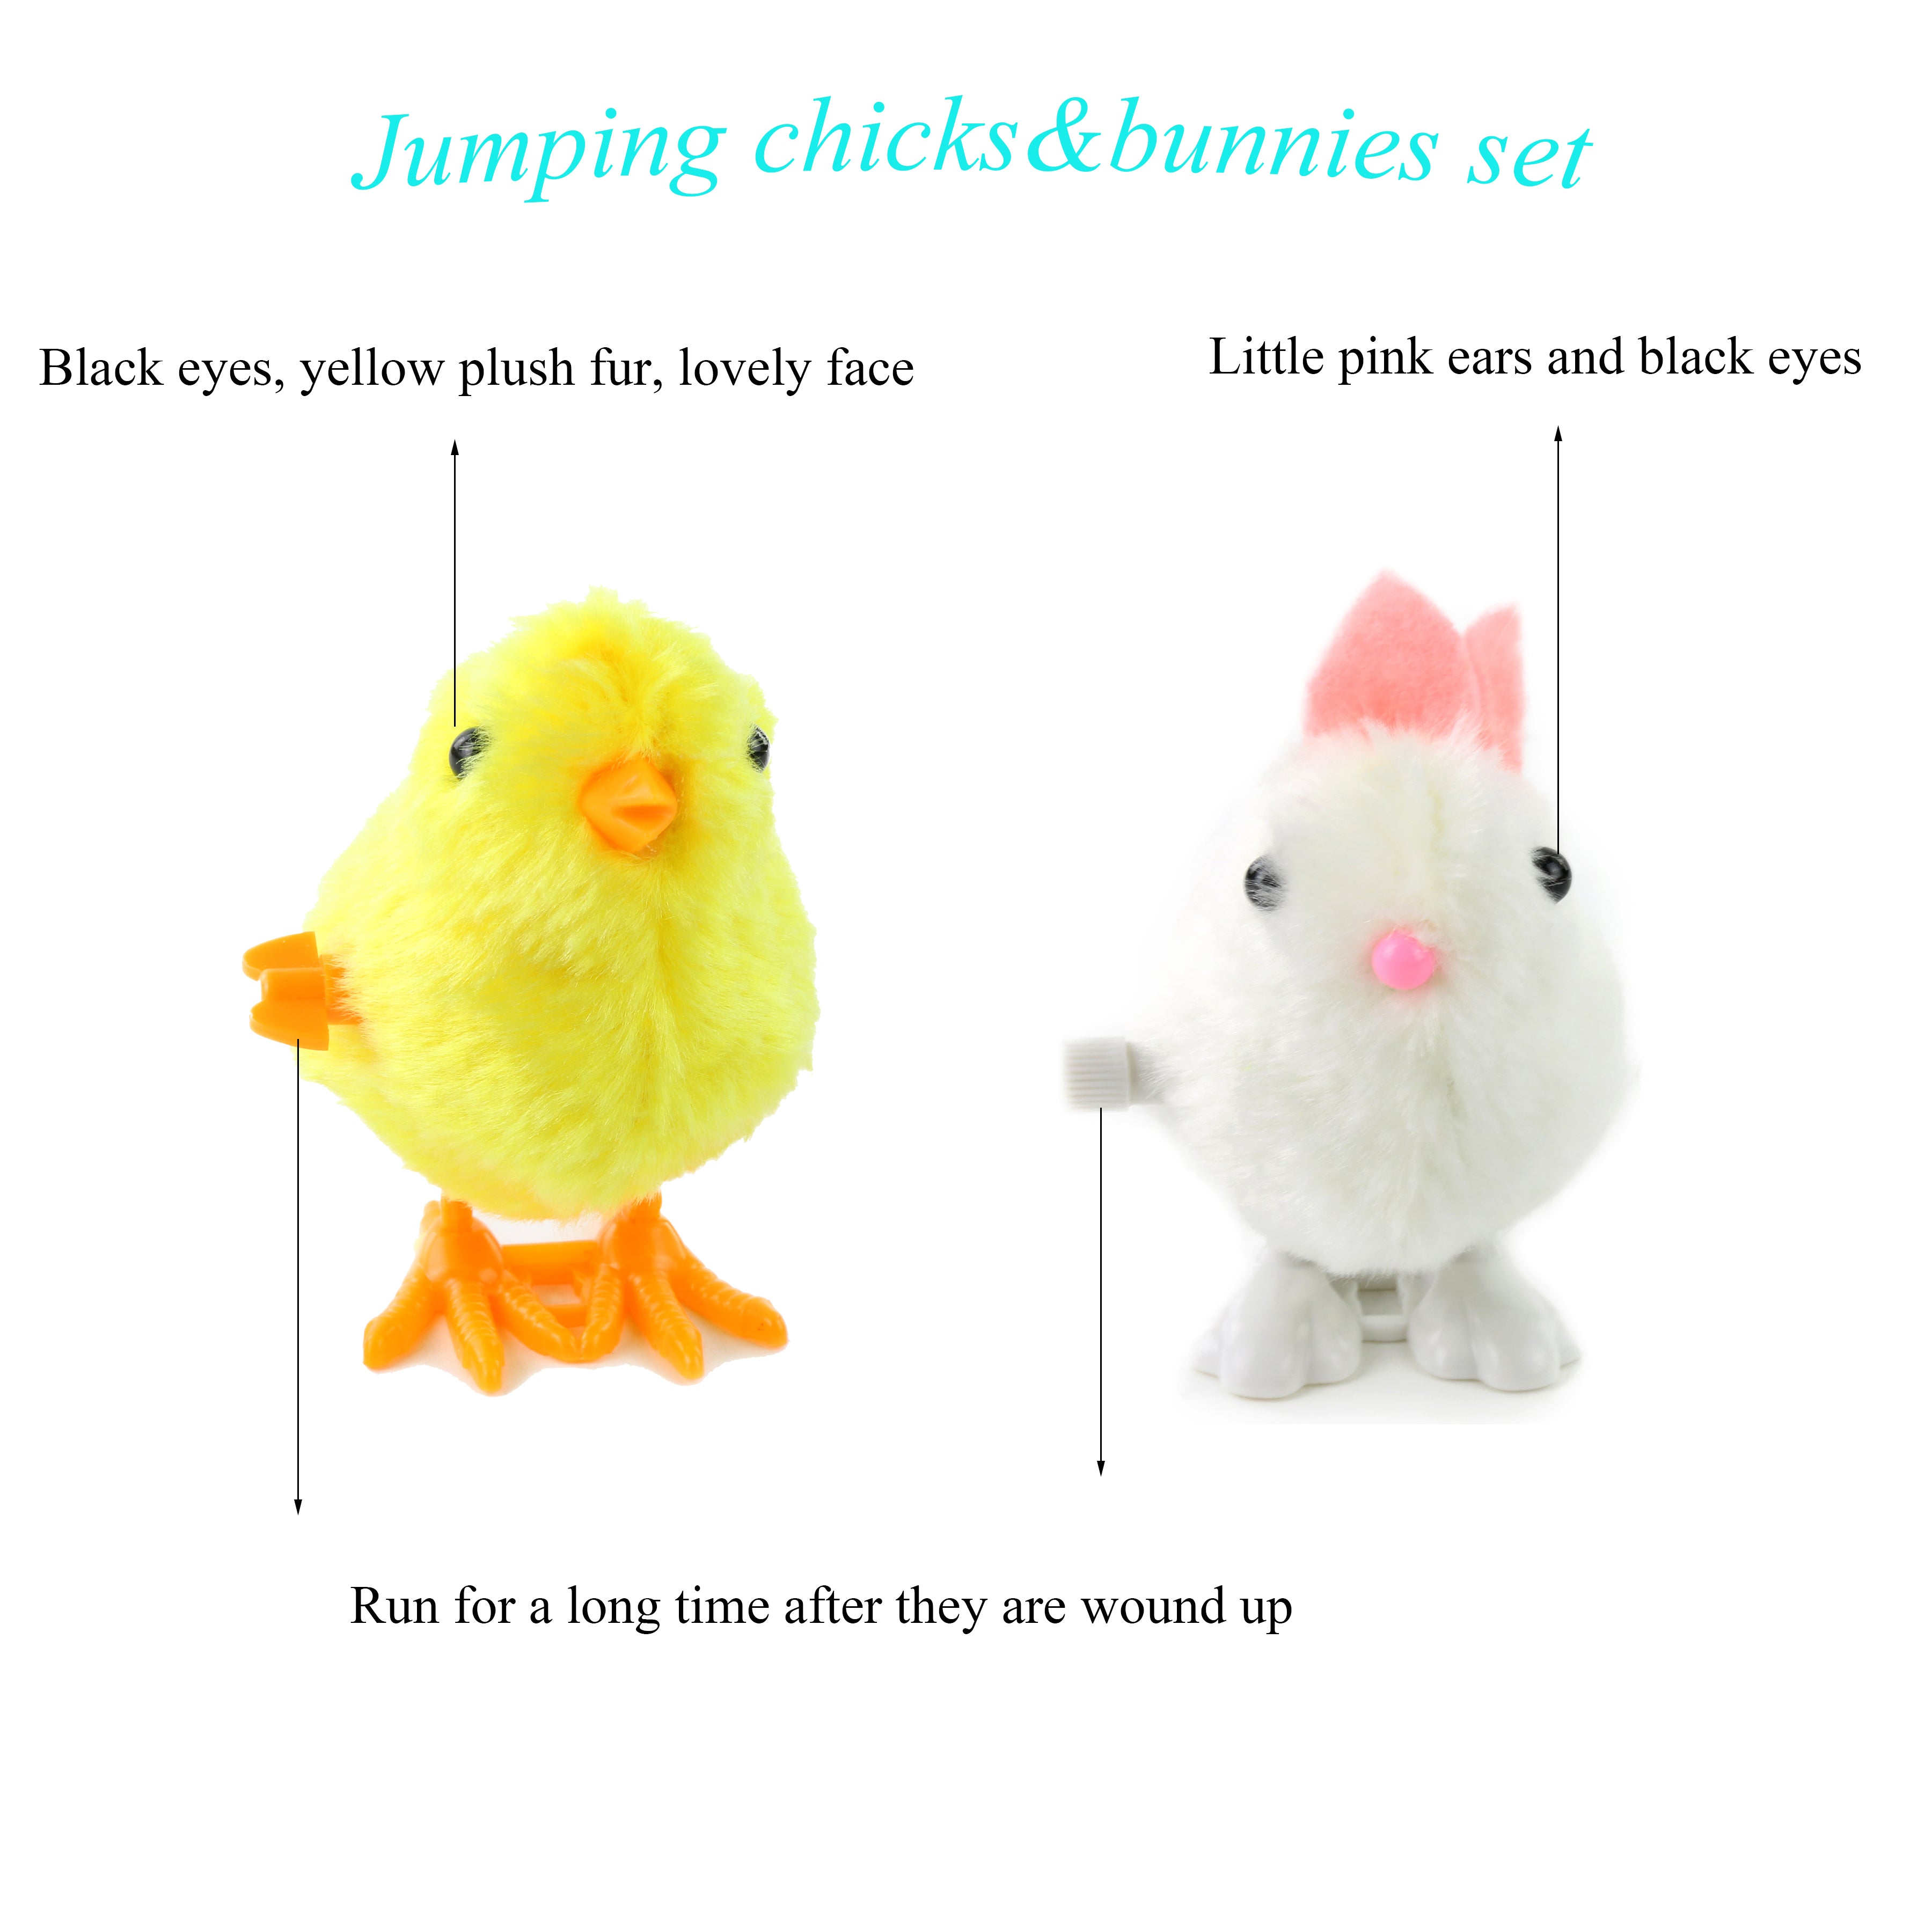 wind up chicks Easter hopping toys party favor, pack of 4/12 | Bstaofy - Glow Guards